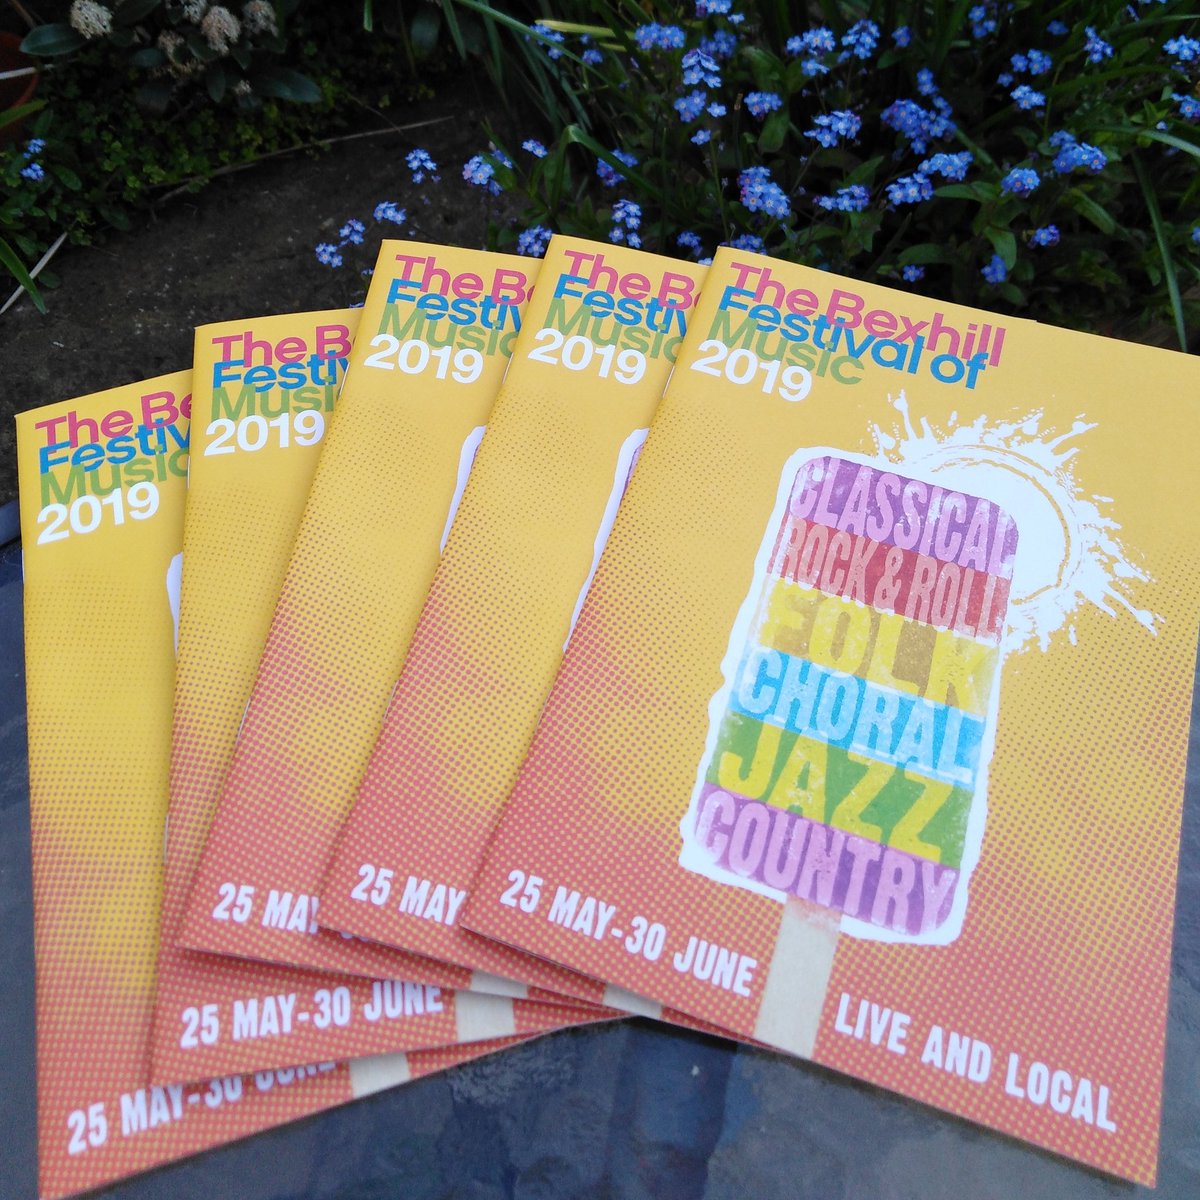 The Bexhill Festival of Music starts next month.  Pick up a free programme of events this weekend from #Delawarrpavilion @bexhillmuseum @No48Bexhill #Sussex #EastSussex #music